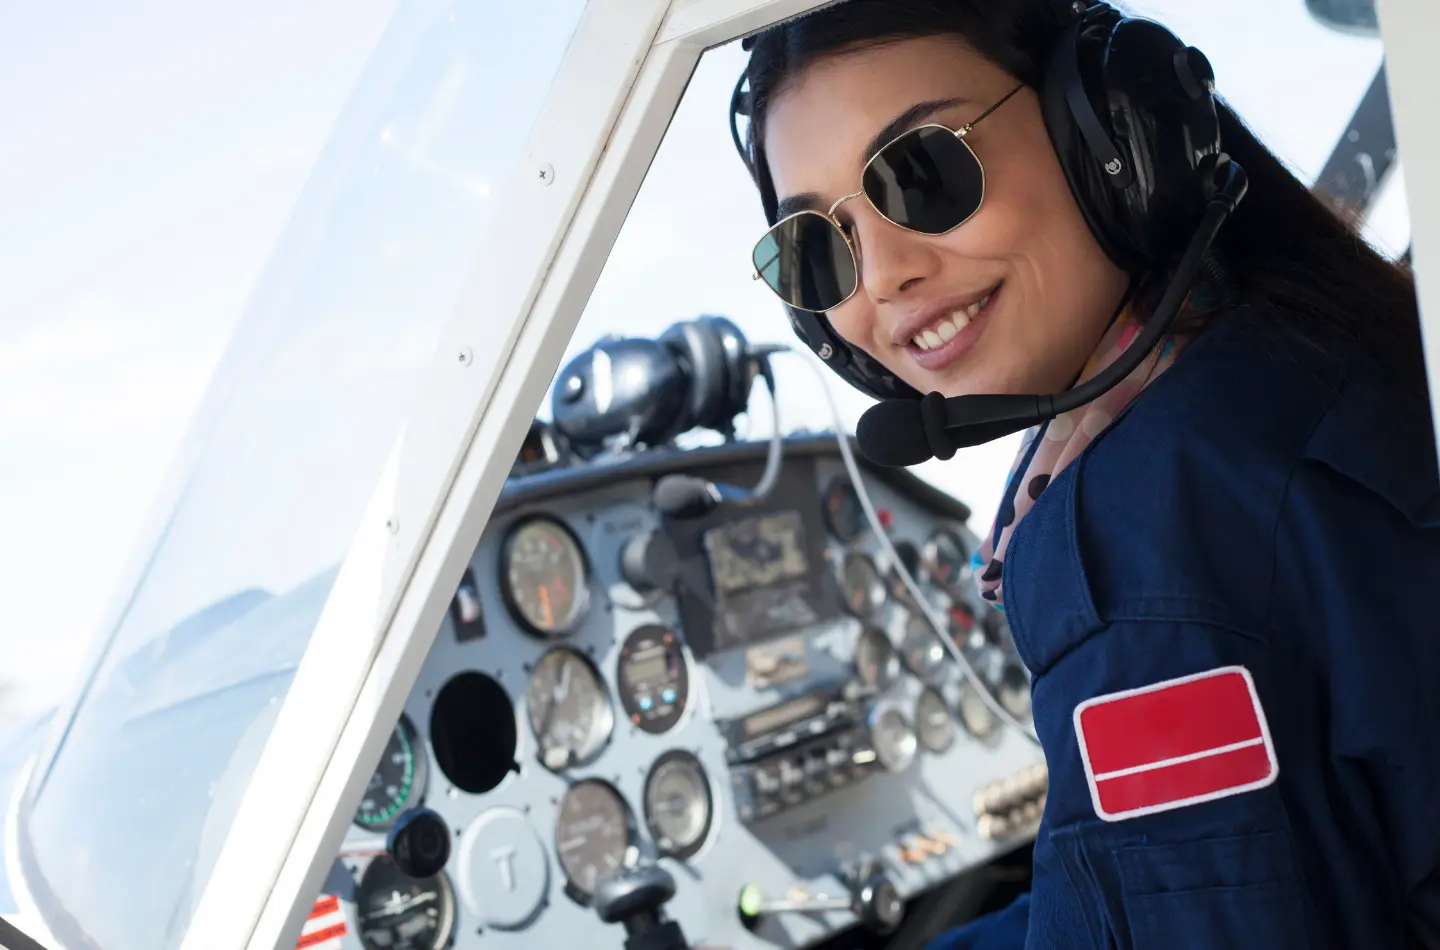 Top Careers For Women in The Aviation Industry